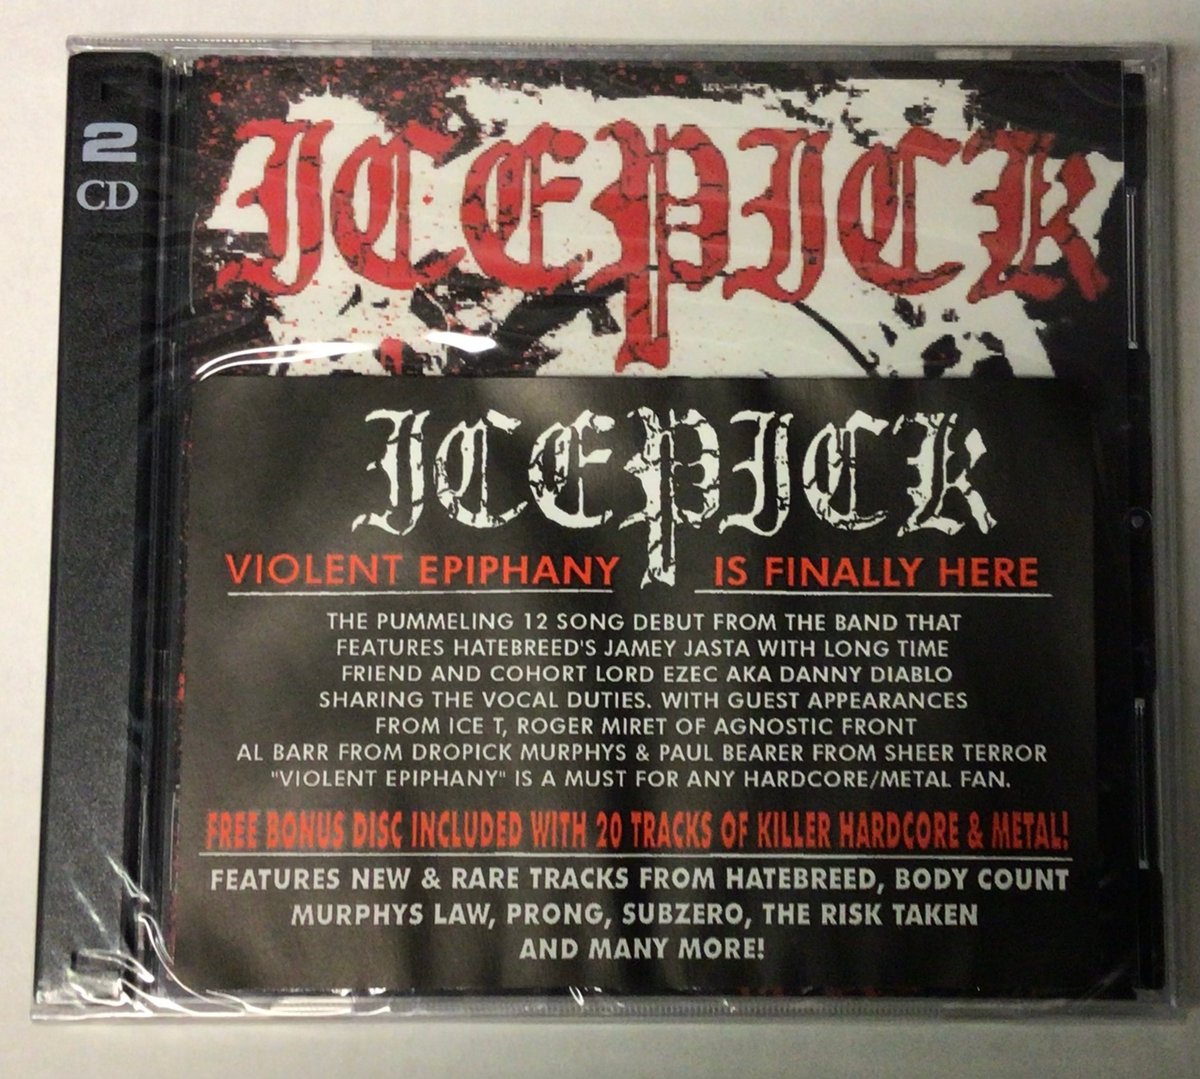 ICEPICK “Violent Epiphany” 2XCD | Generation Records